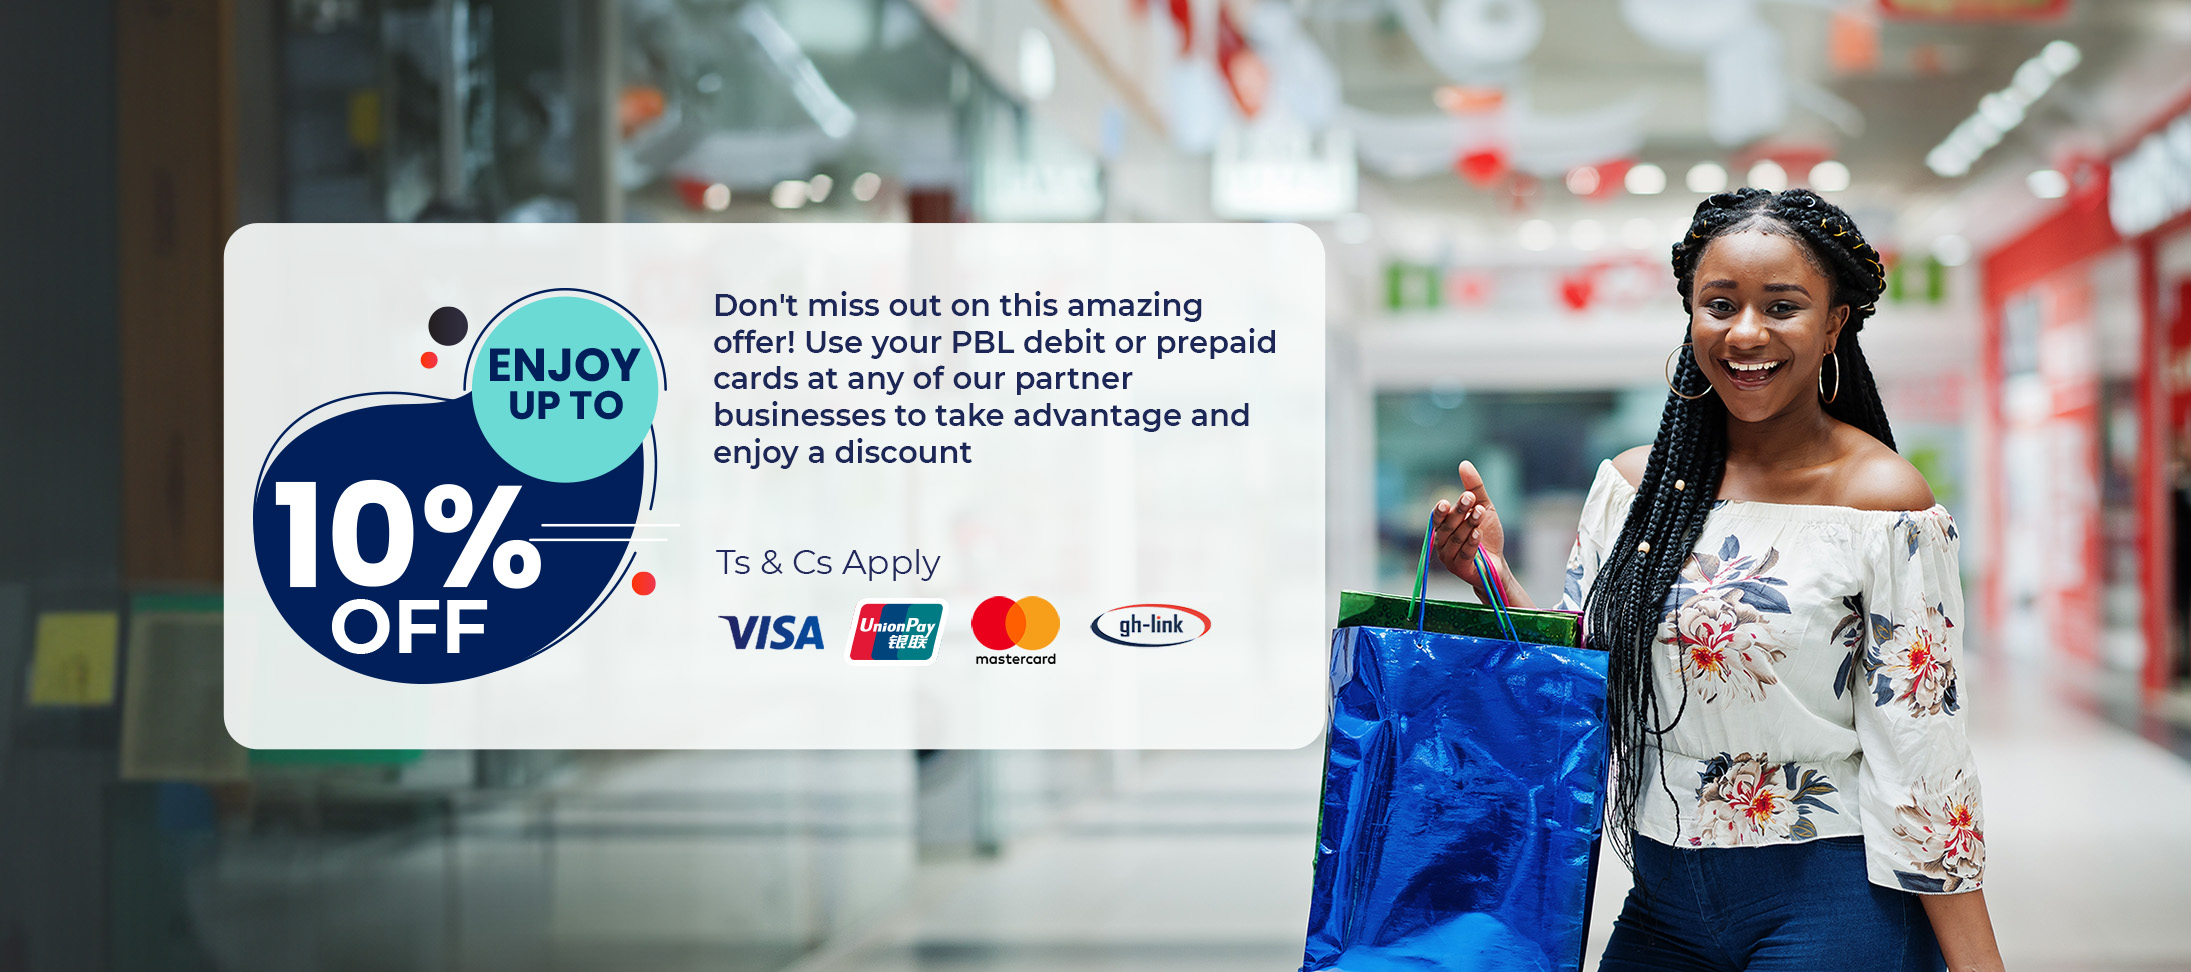 Image: Prudential Bank Discount Campaign Banner showing an excited lady holding shopping bags